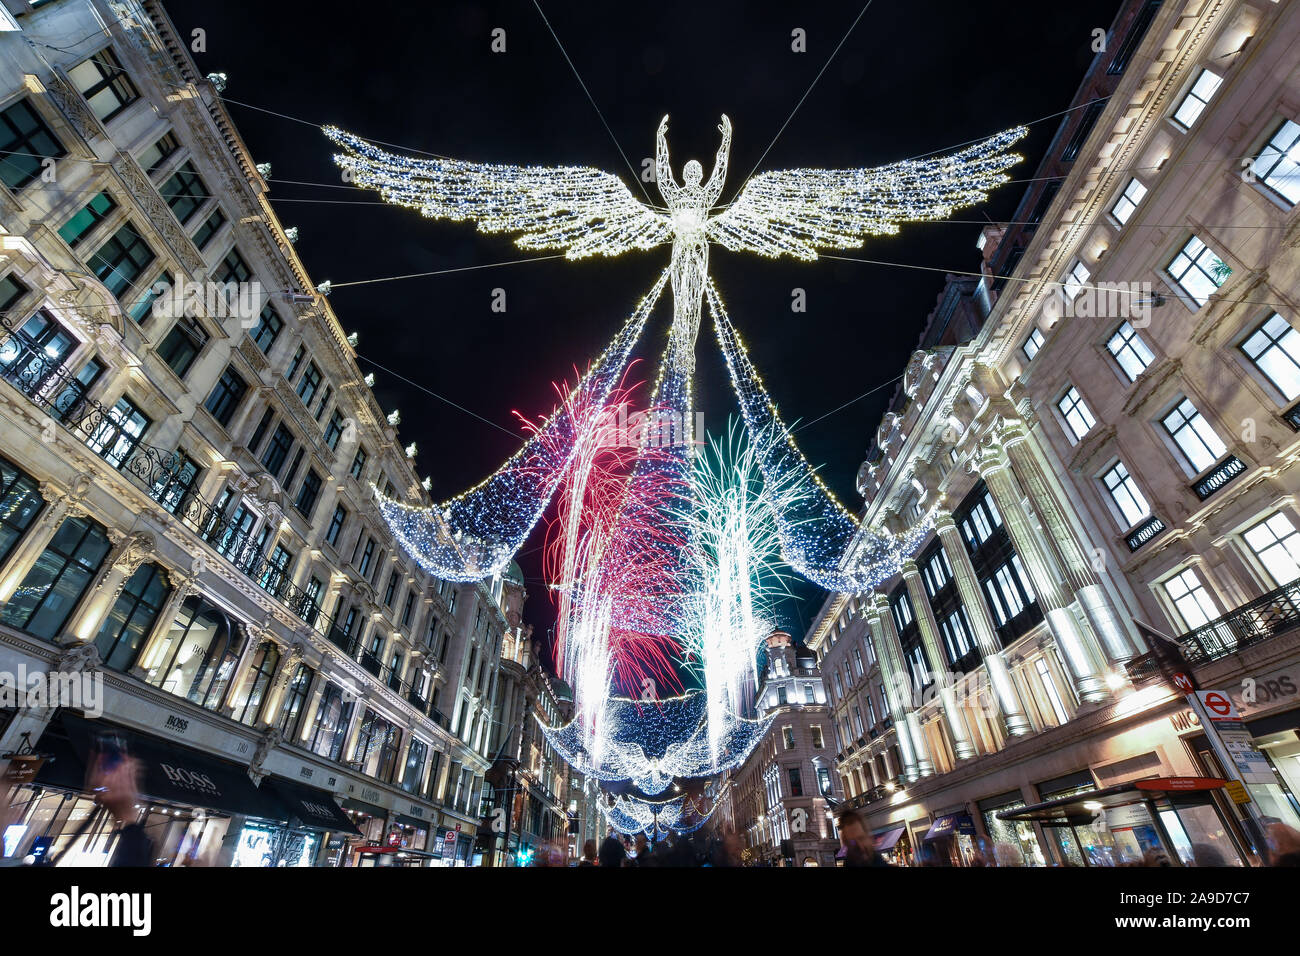 When Do The London Christmas Lights Go On For 2023? Full List Of Switch On  Dates So Far